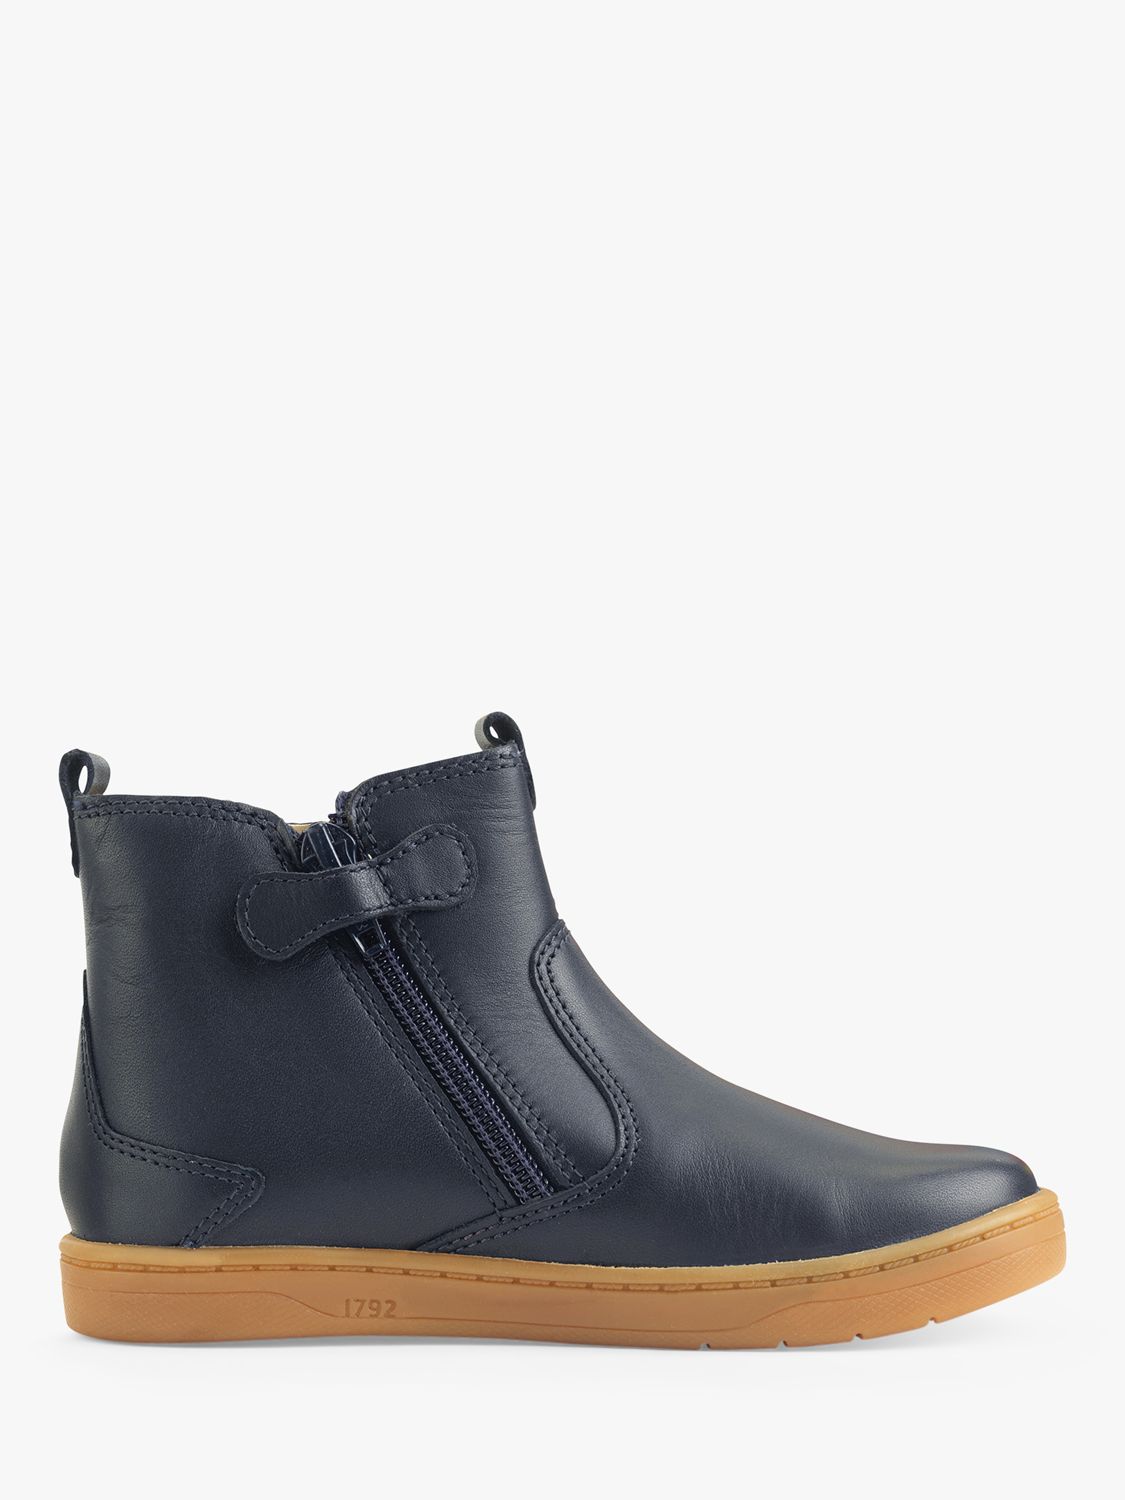 Buy Start-Rite Kids' Energy Ankle Boots, Navy Online at johnlewis.com